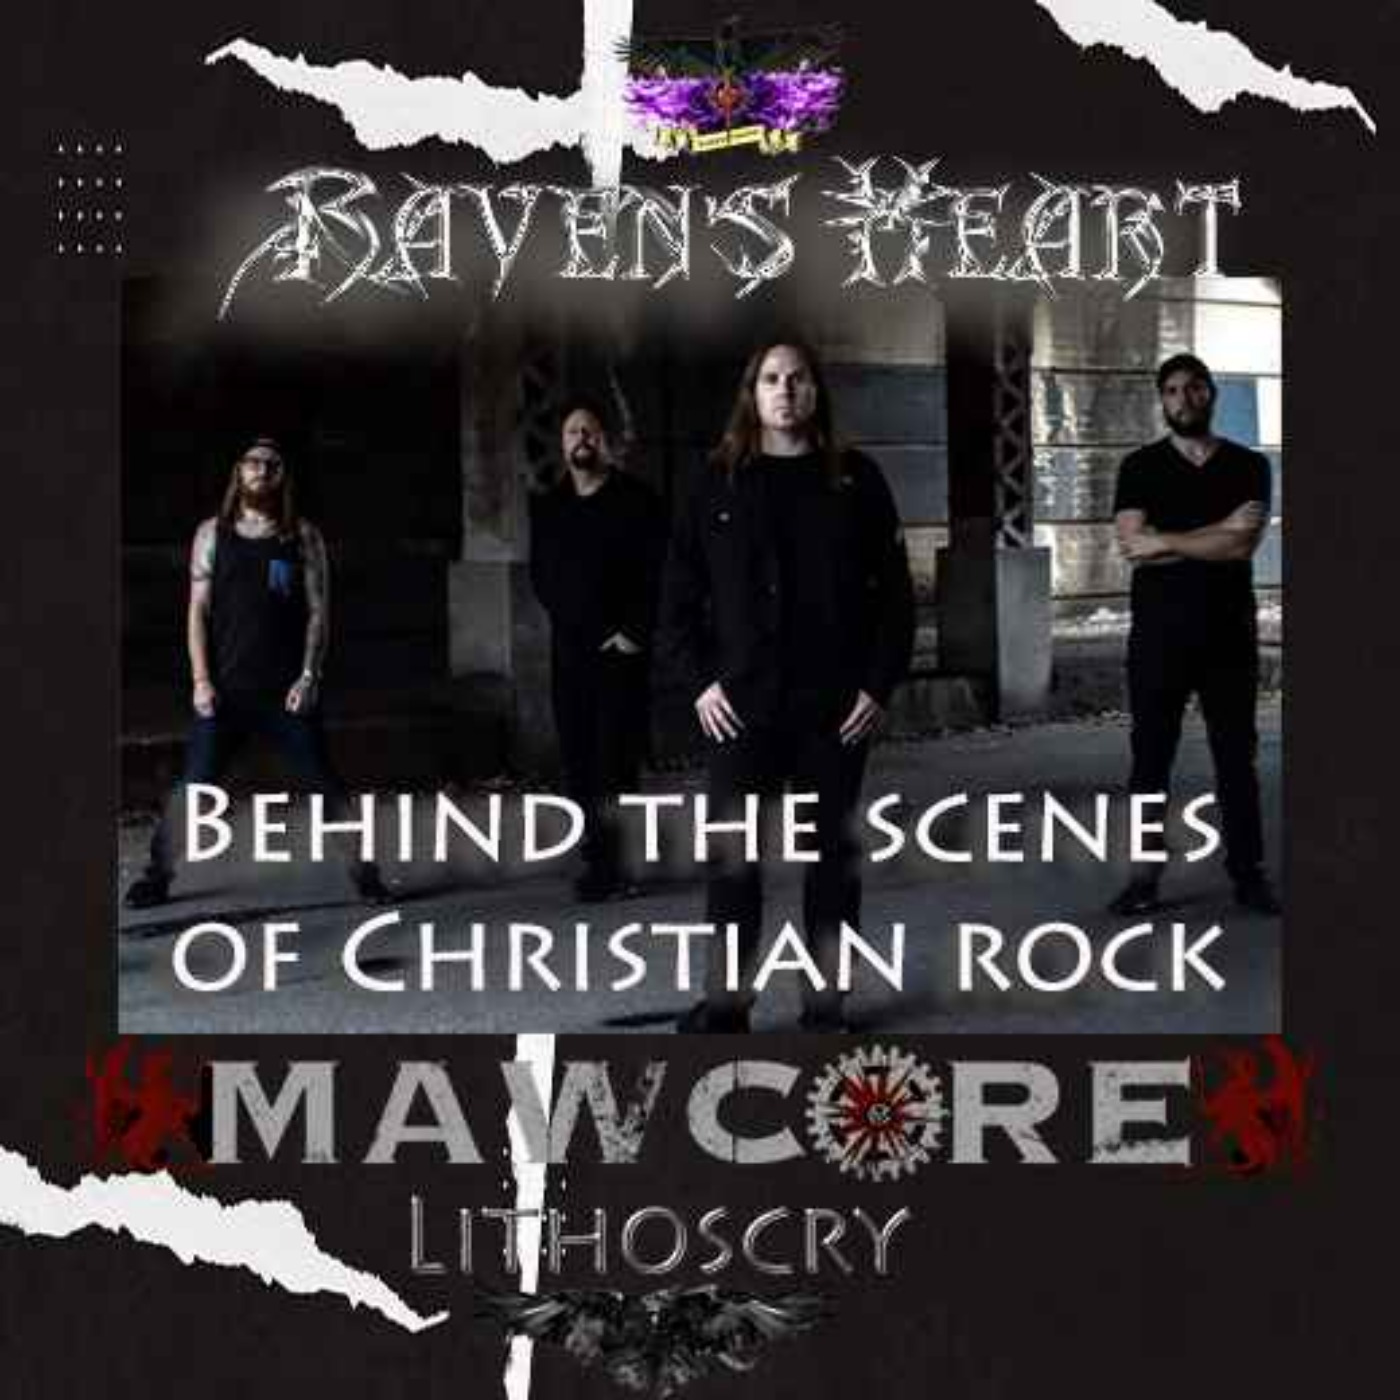 cover art for Behind The Scenes of Christian Rock with Mawcore